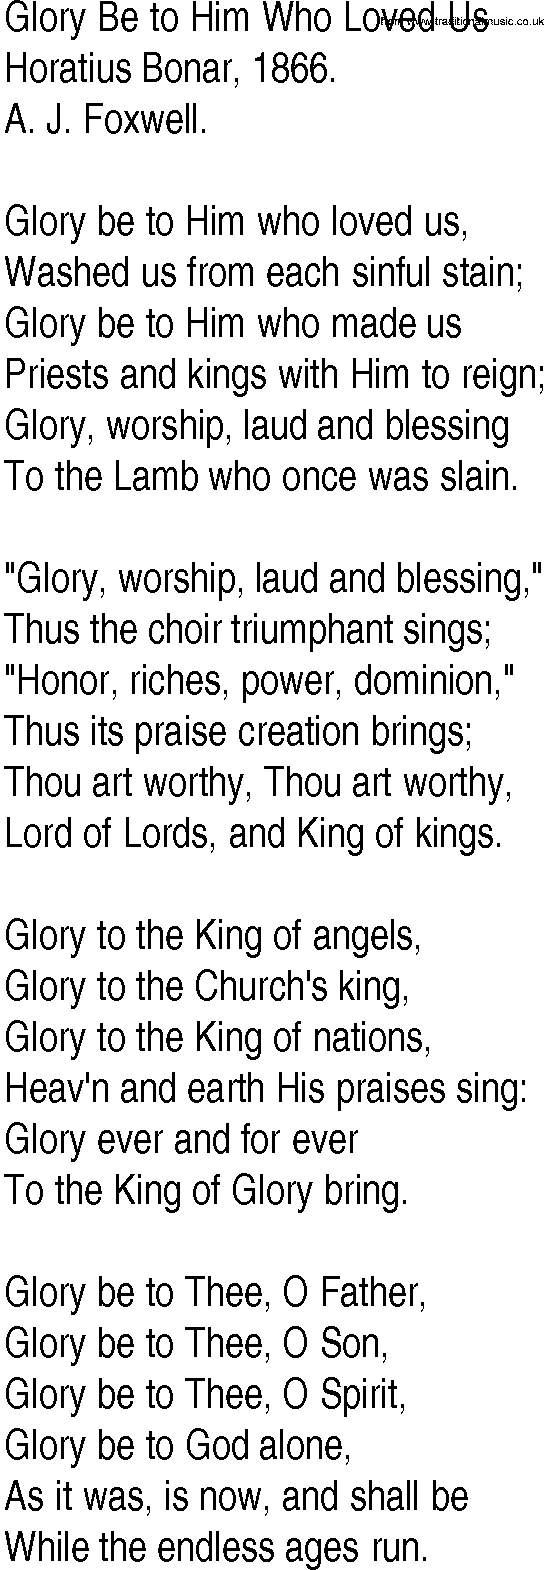 Hymn and Gospel Song: Glory Be to Him Who Loved Us by Horatius Bonar lyrics